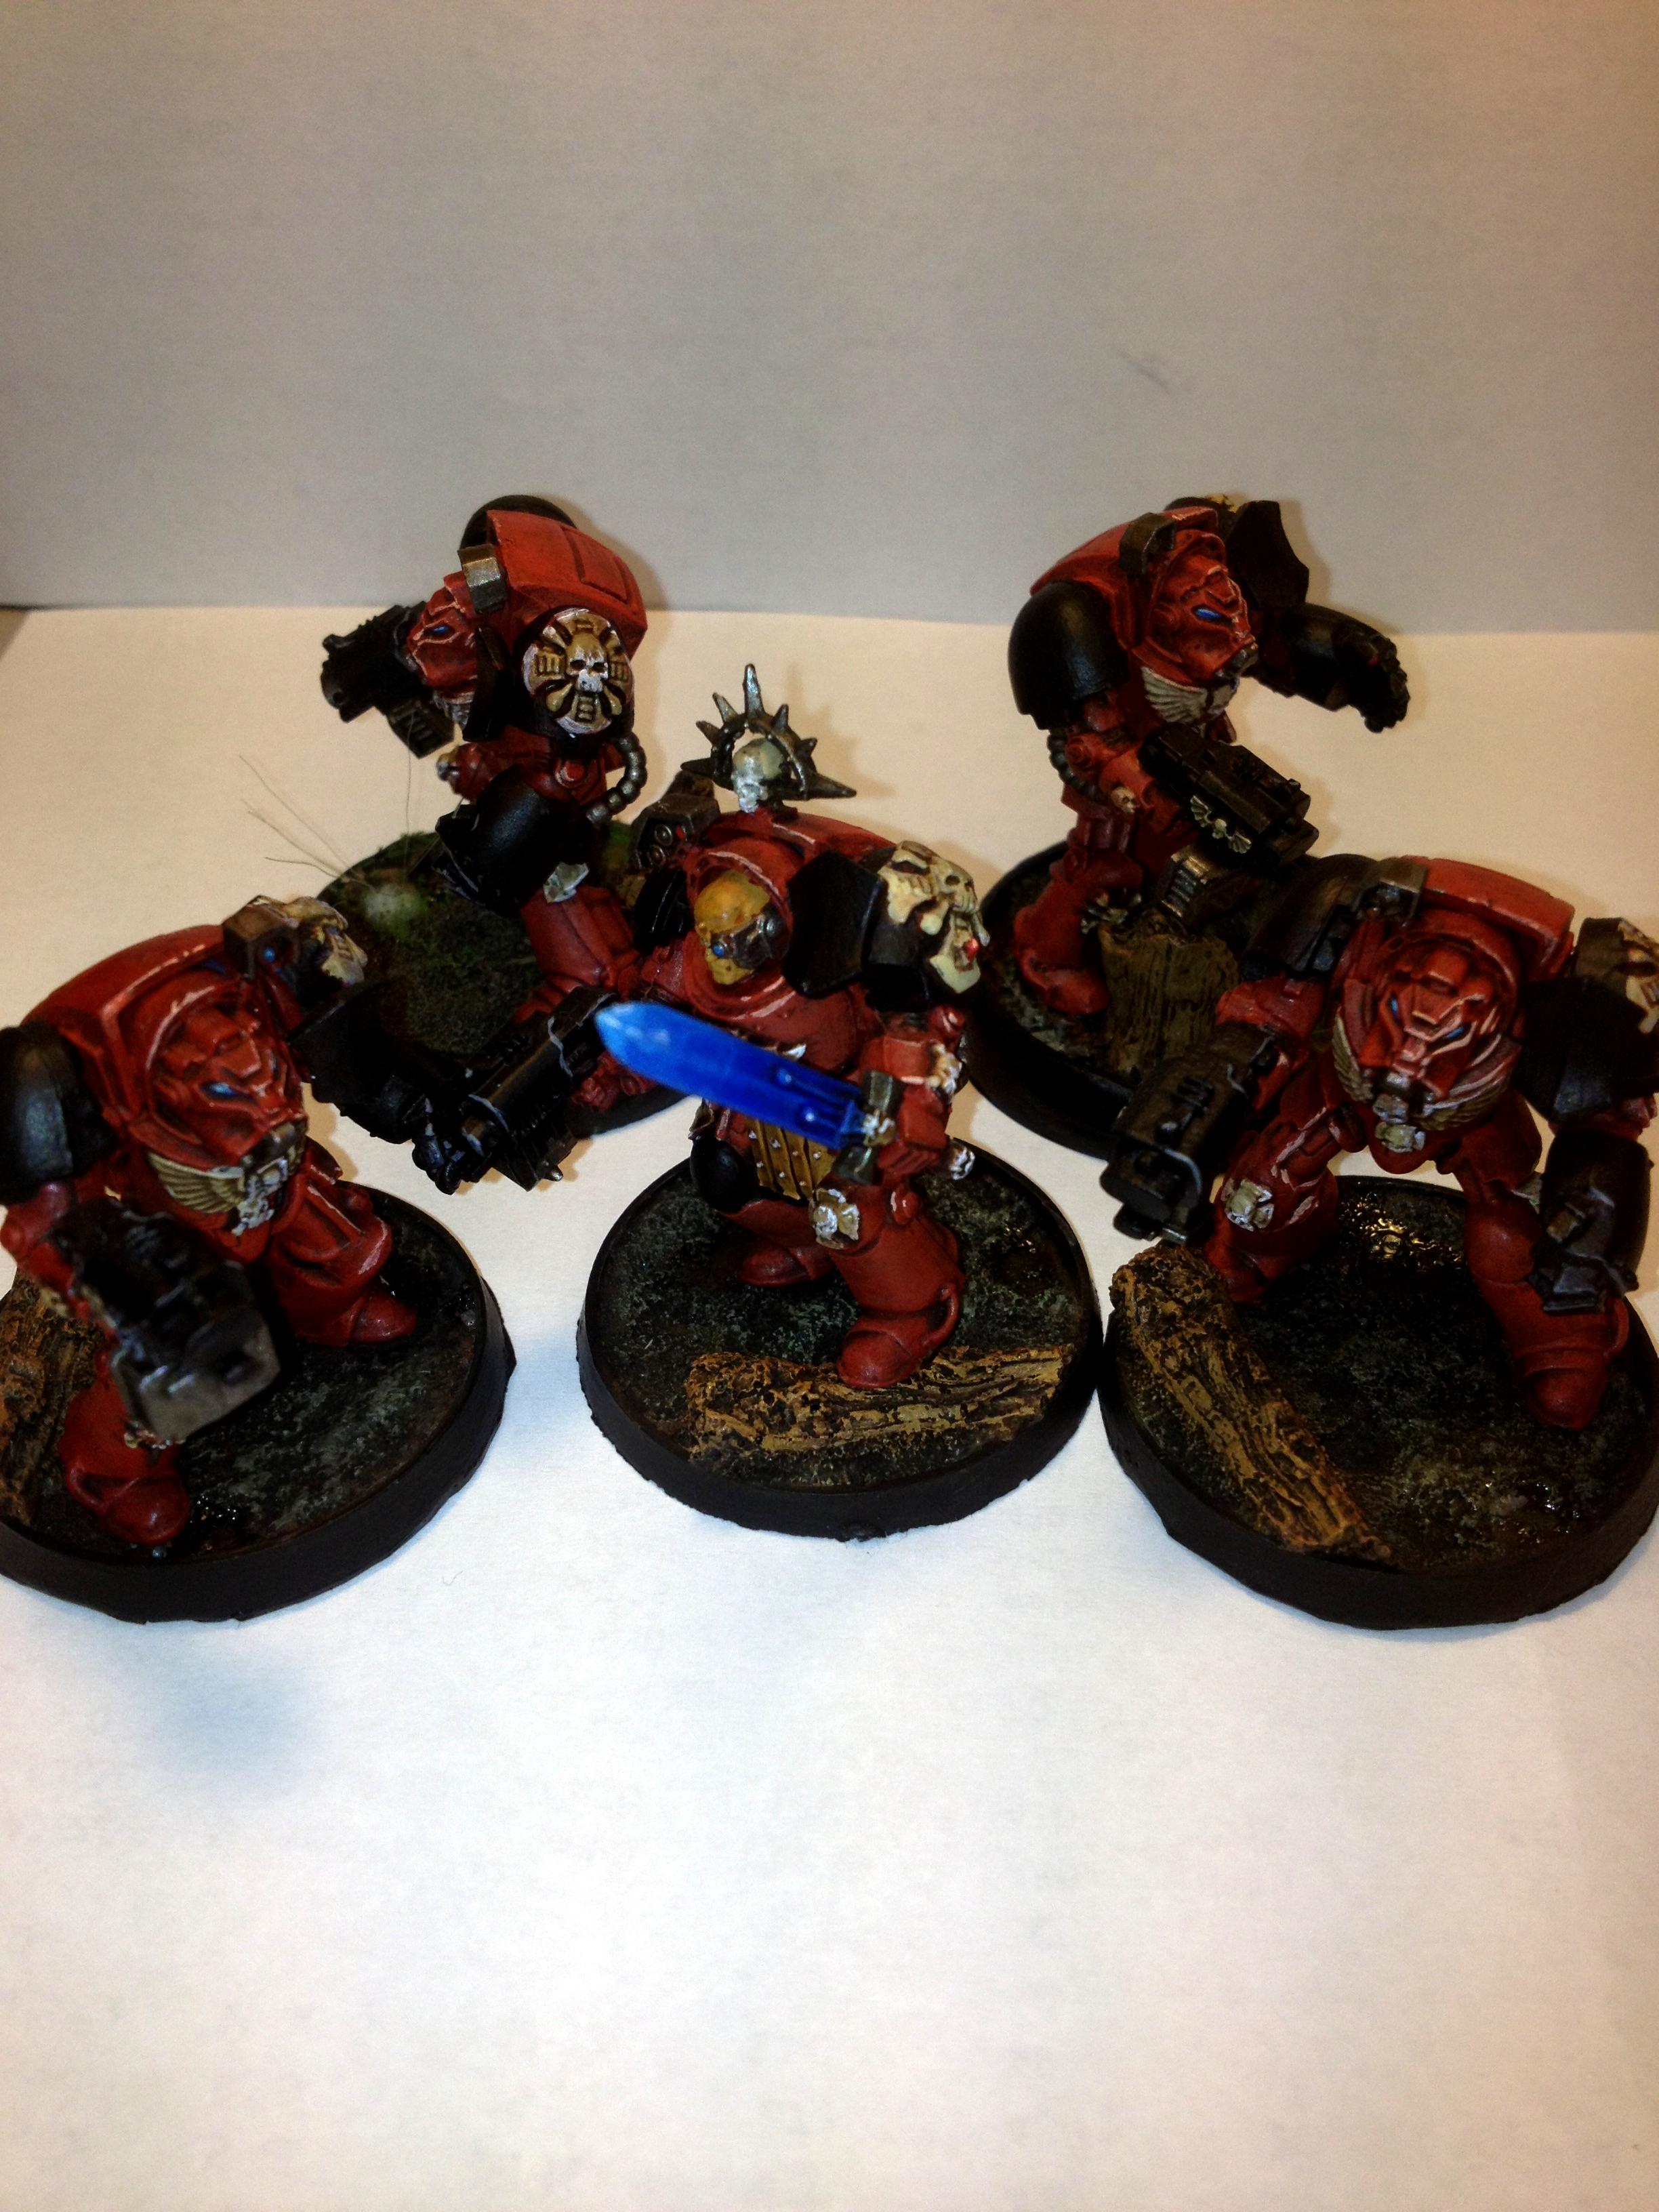 Get In The Game Painting Blog, Terminator Armor, Warp Dust Creations